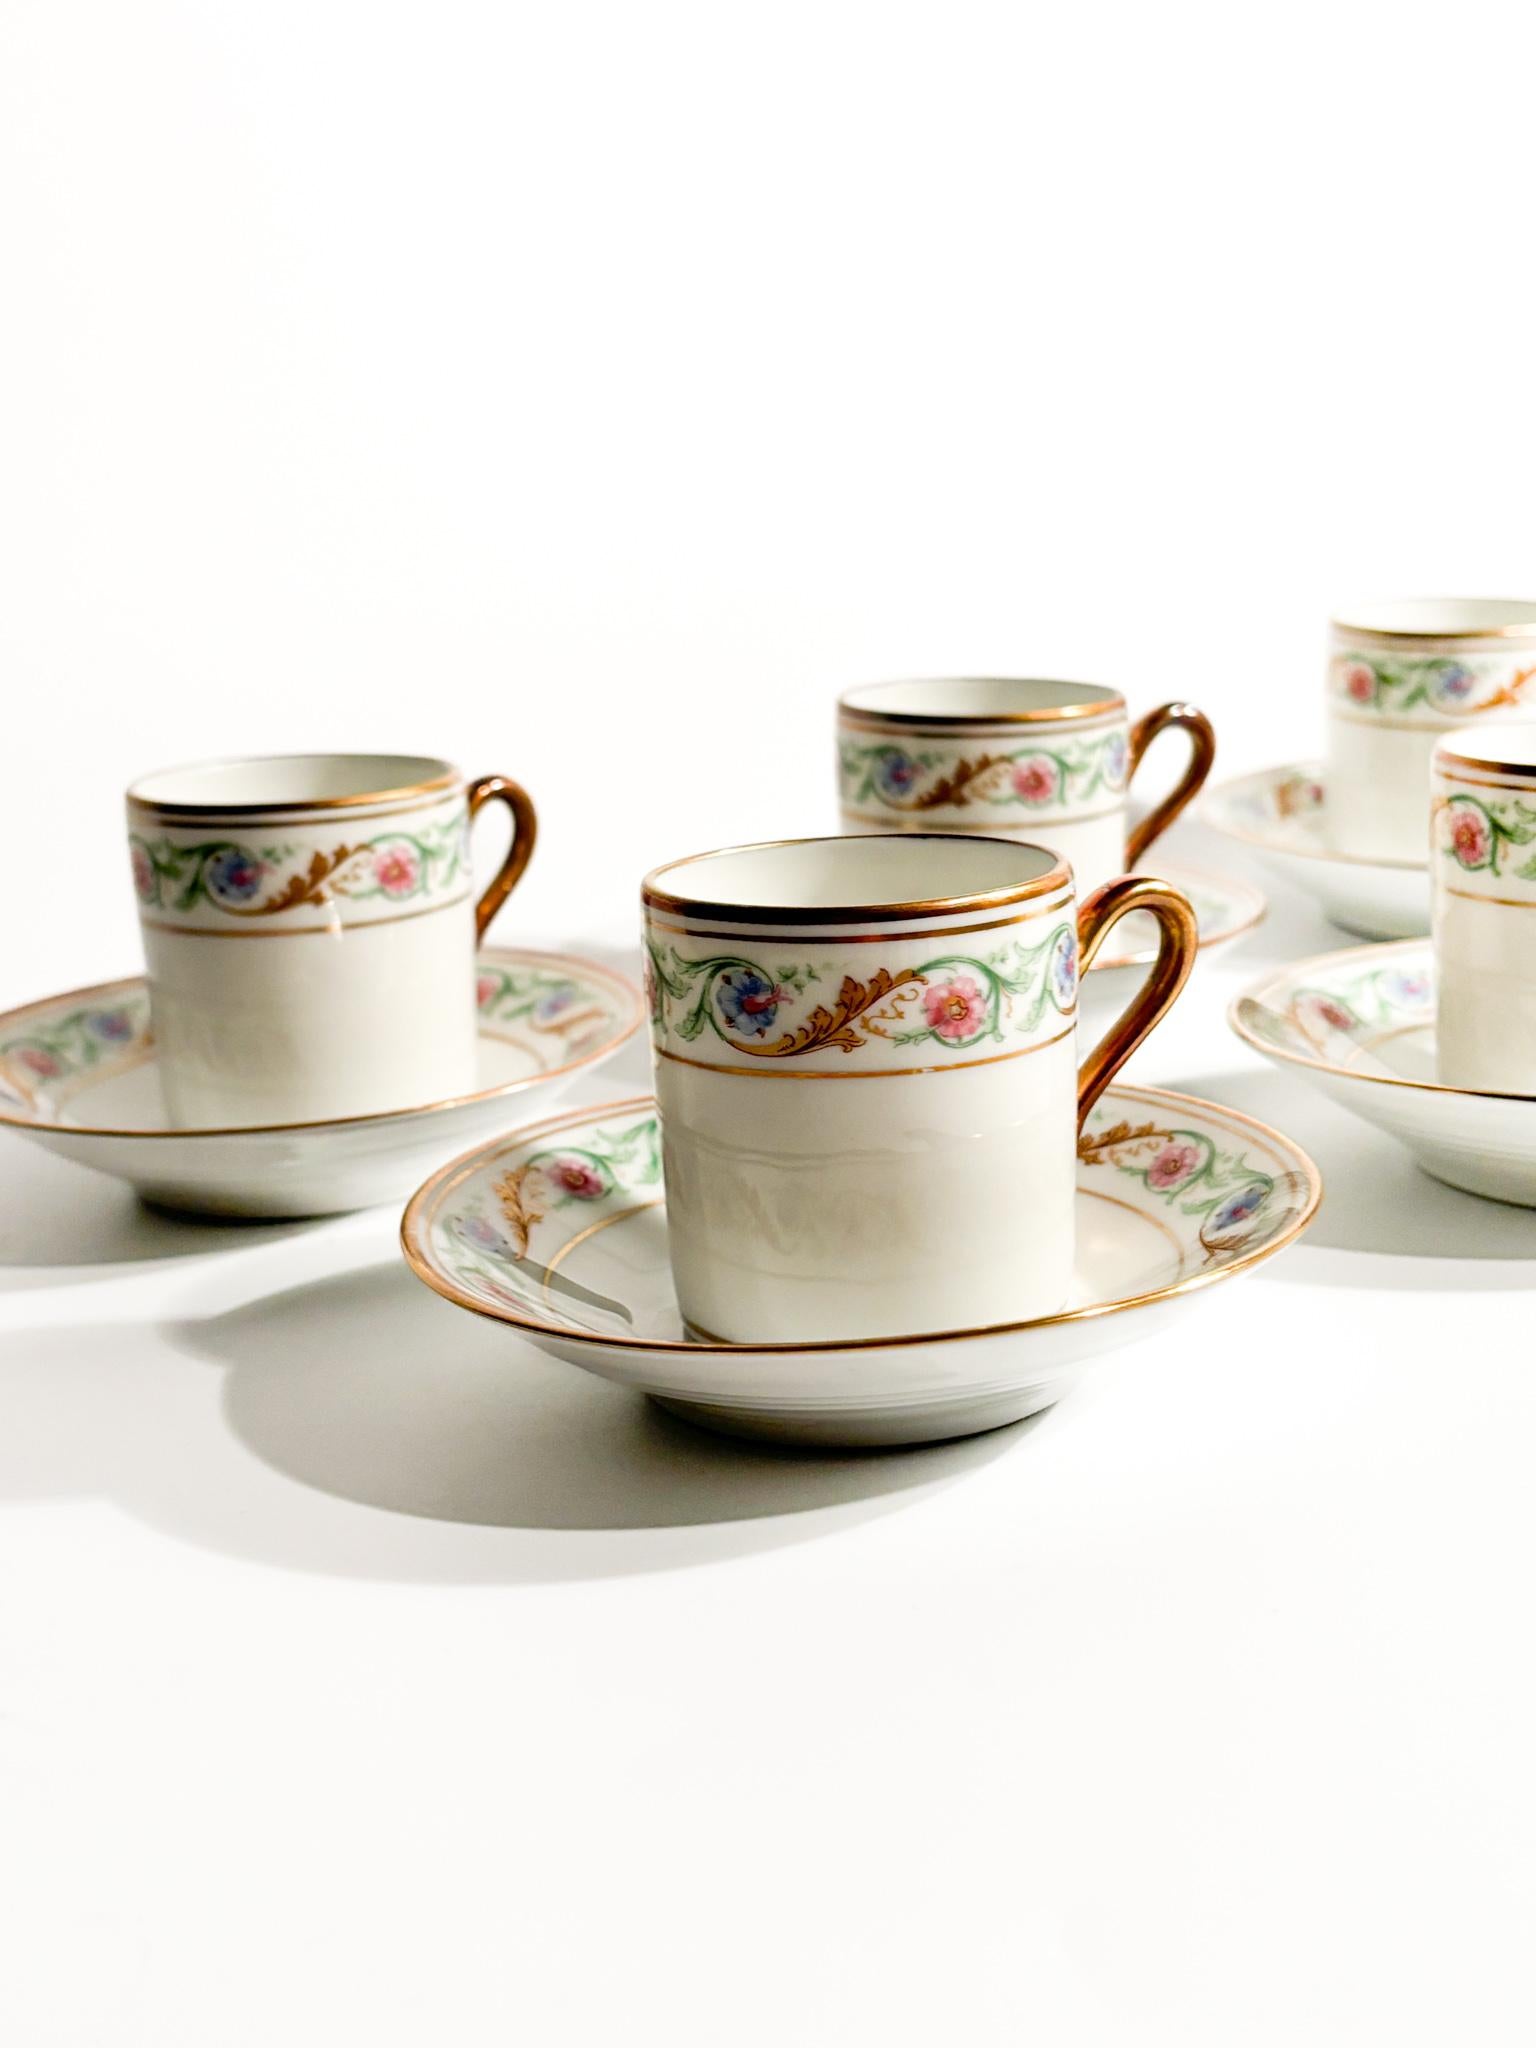 Mid-20th Century Set of Six Porcelain Coffee Cups by Ginori Doccia Pittoria from the 1940s For Sale